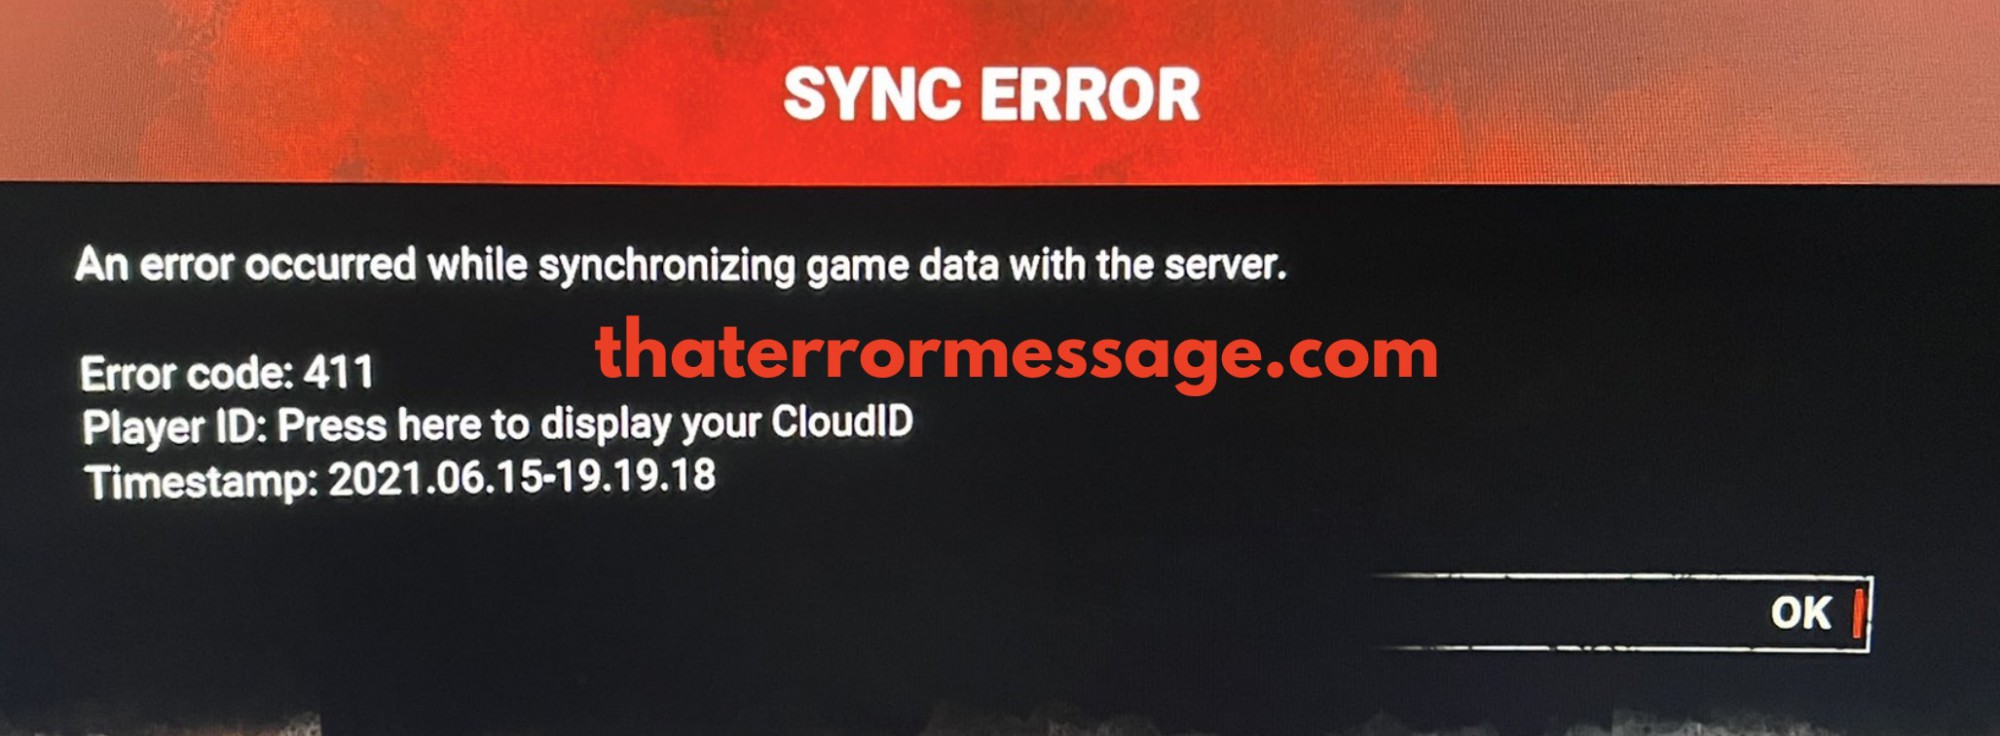 Error Occurred While Synchronizing Game Data 411 Dead By Daylight